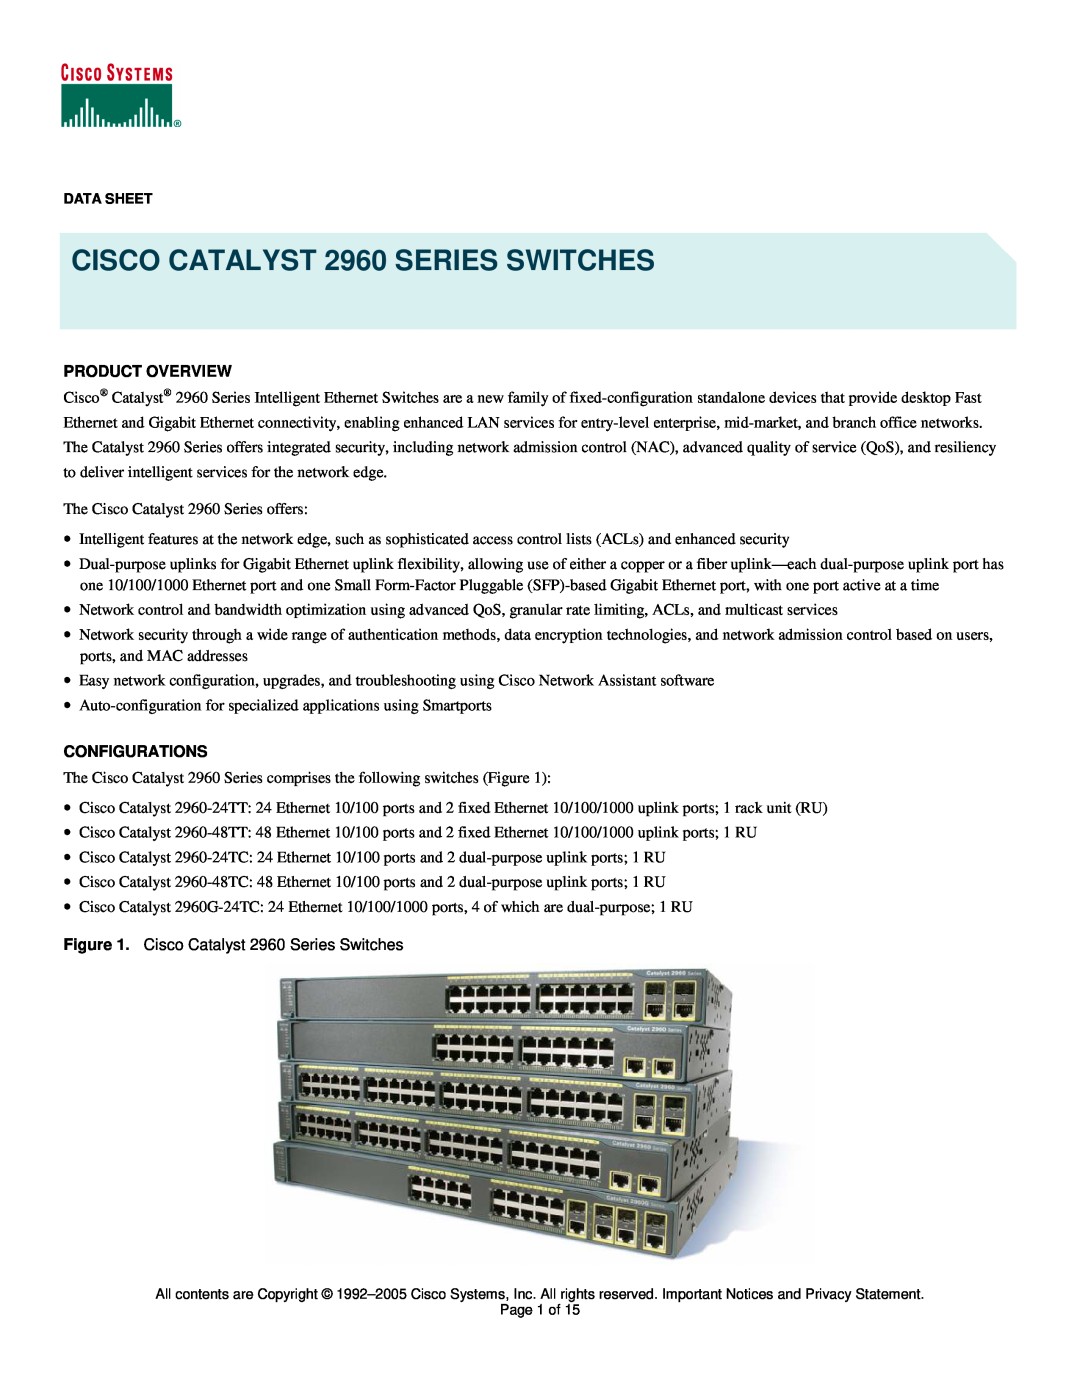 Cisco Systems manual Product Overview, Configurations, CISCO CATALYST 2960 SERIES SWITCHES 